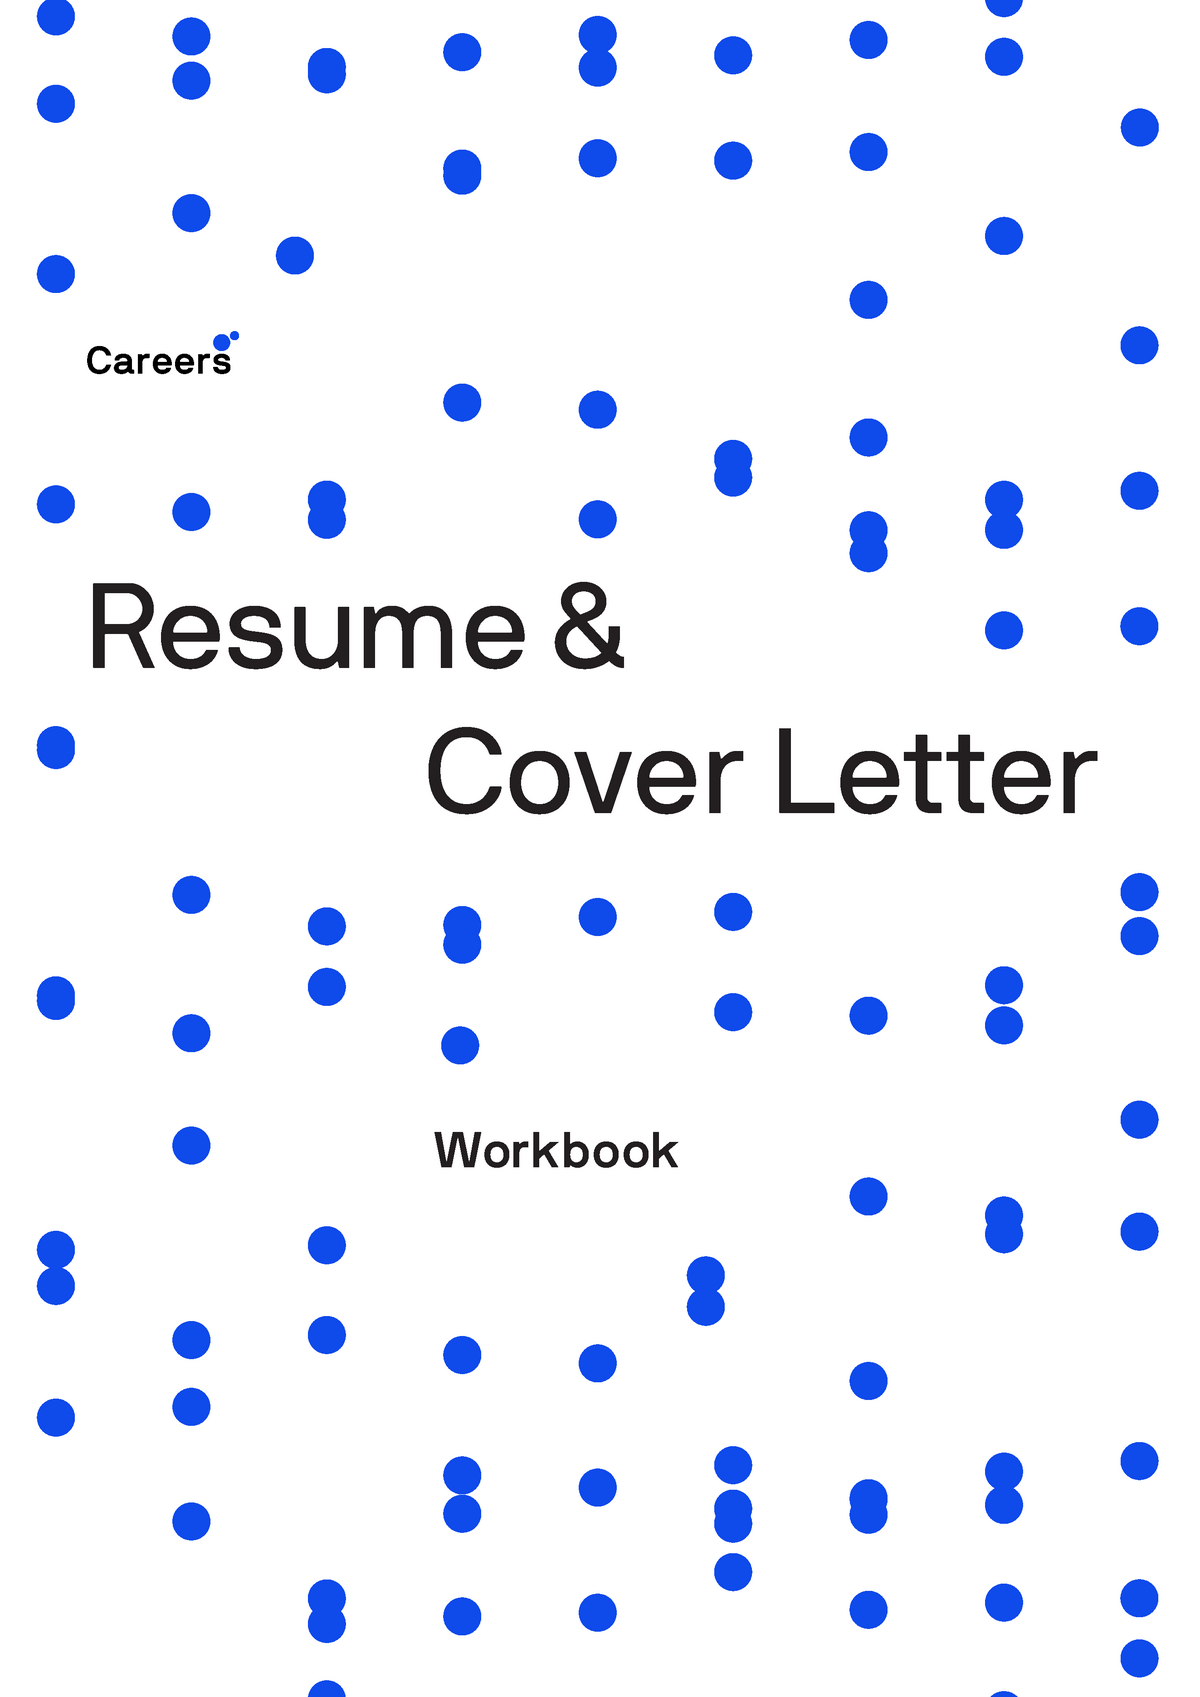 uts careers resume and cover letter booklet